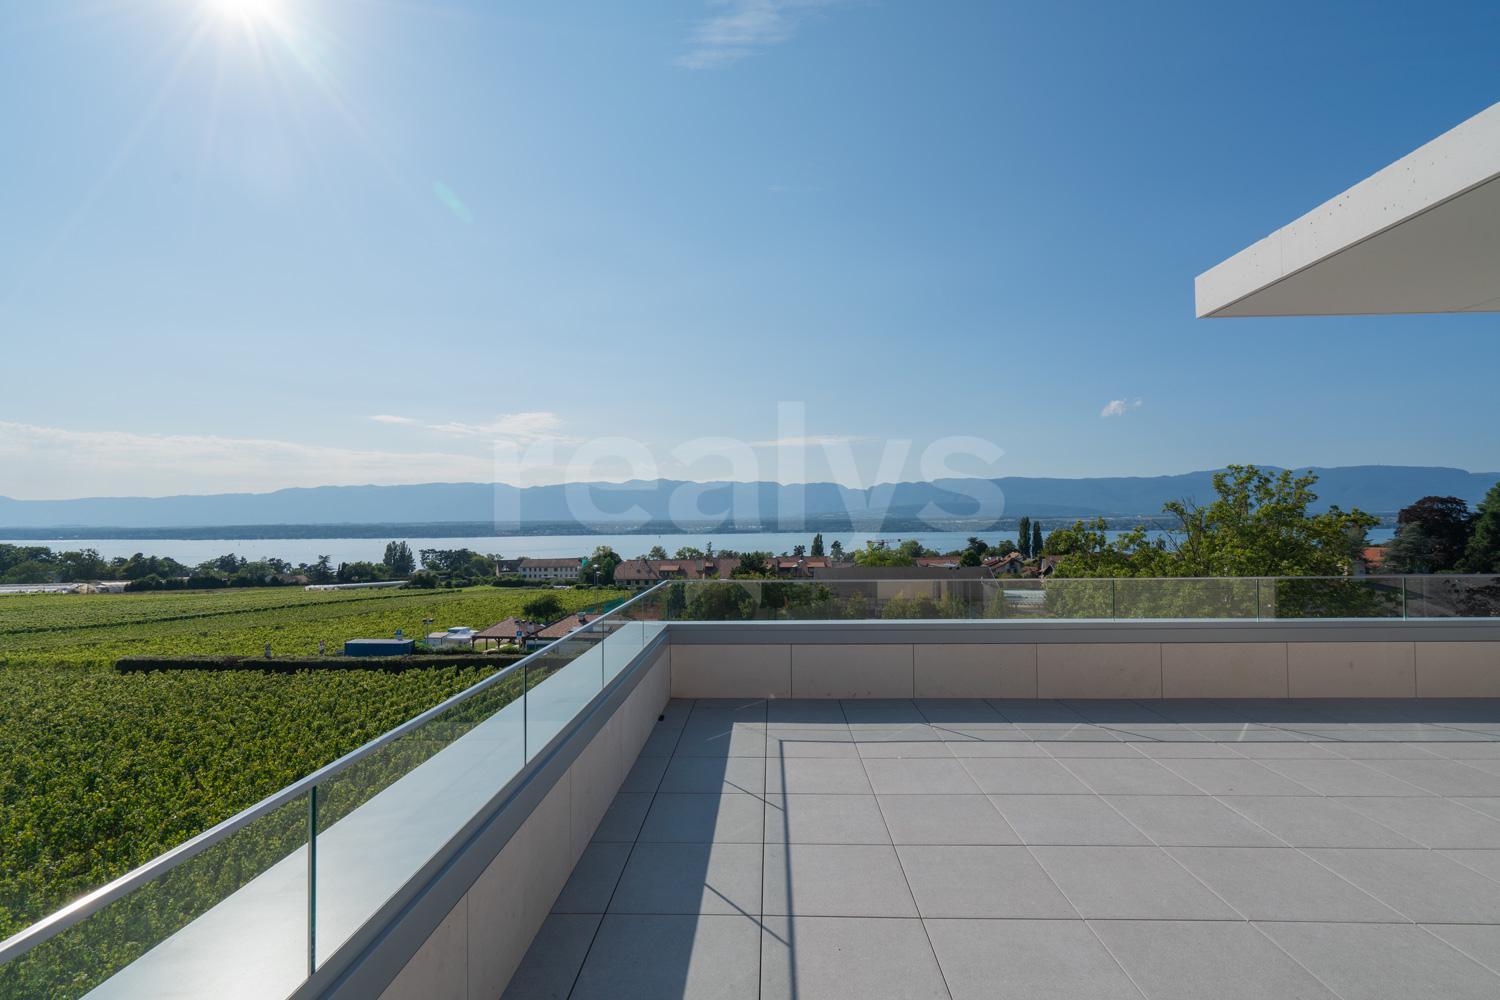 PrivaliaSumptuous 7.5 room penthouse with panoramic view of the lake and mountains